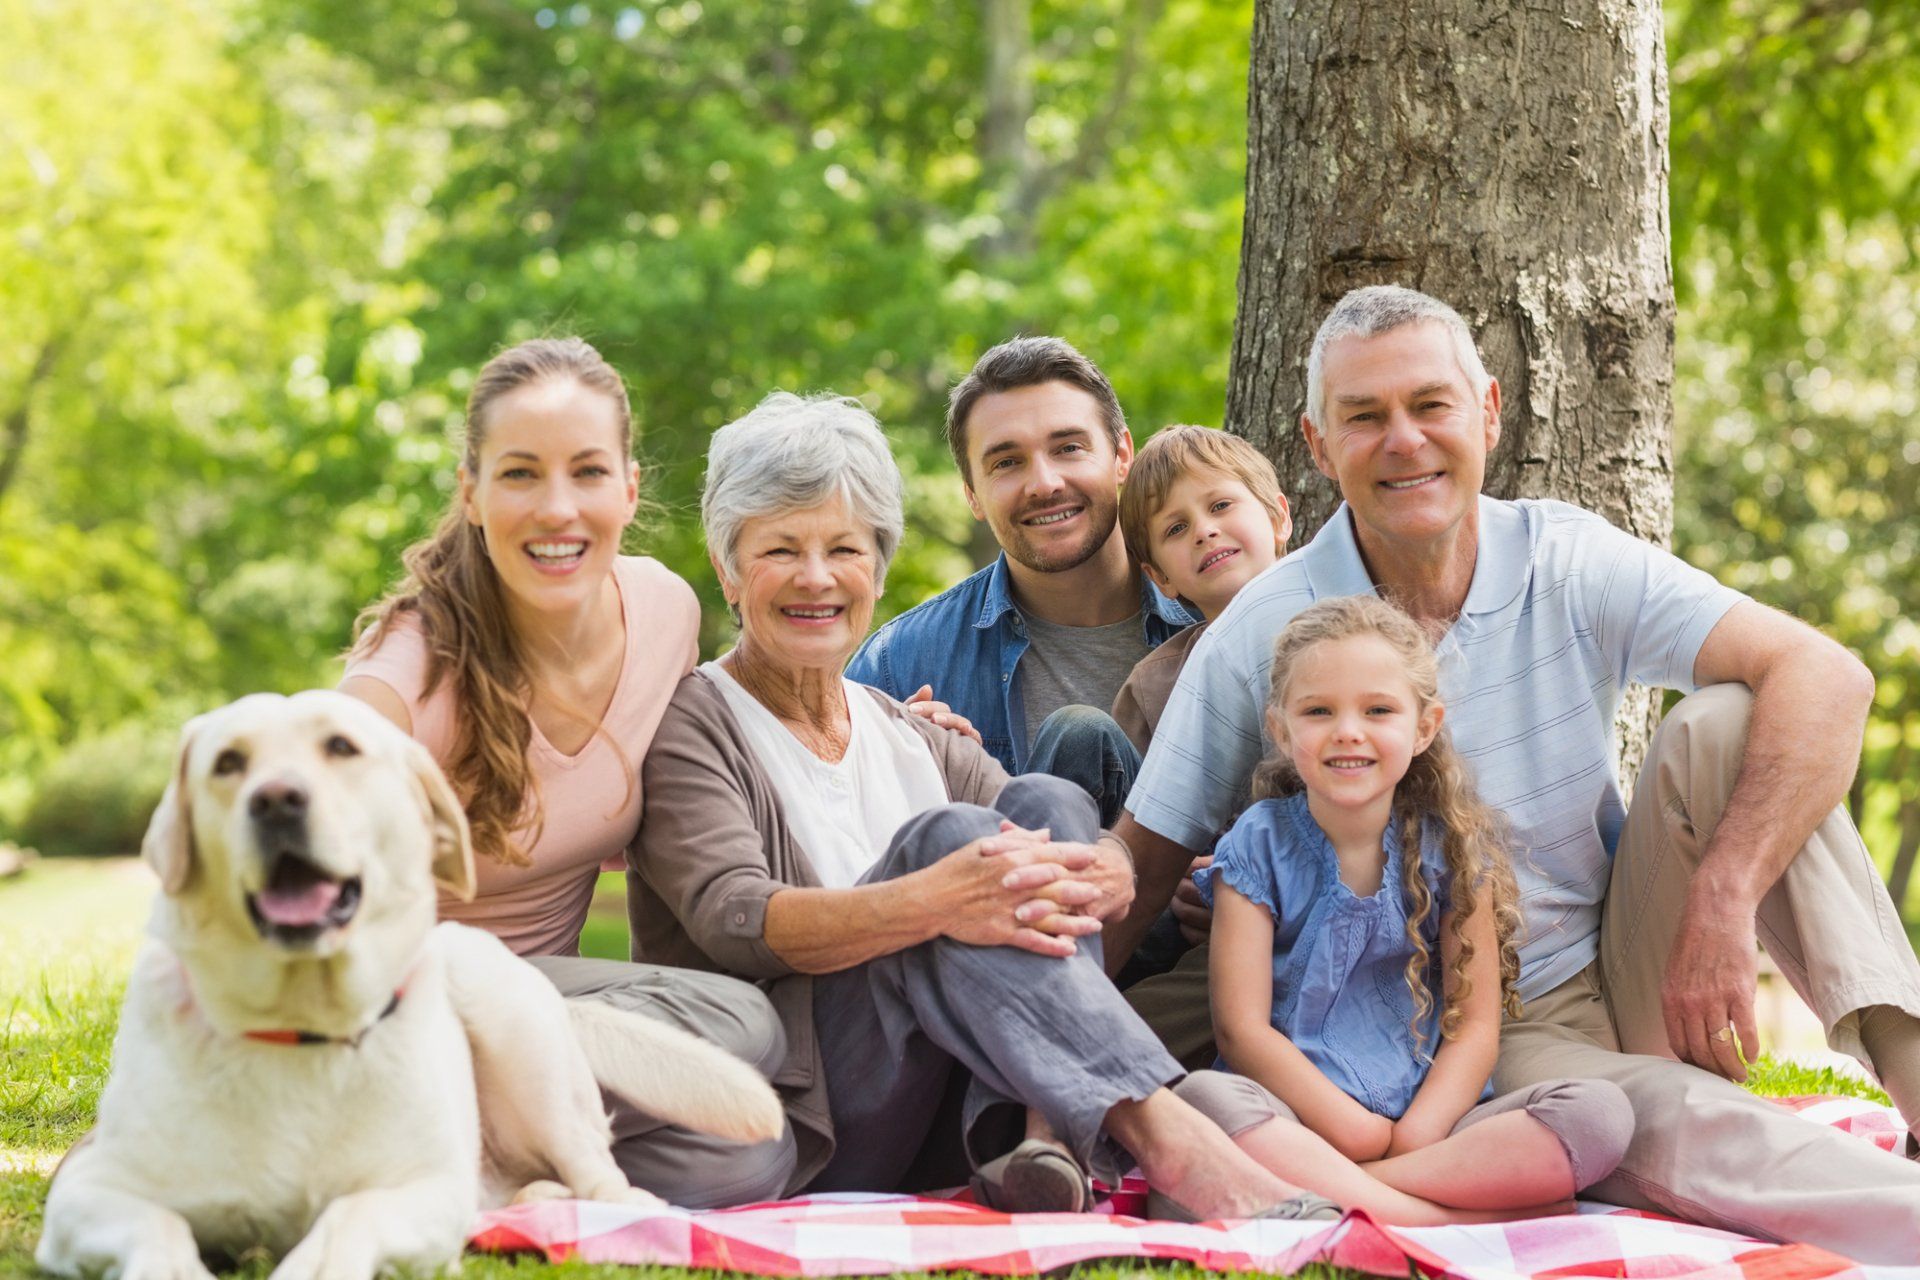 a happy extended family picnics together under a tree